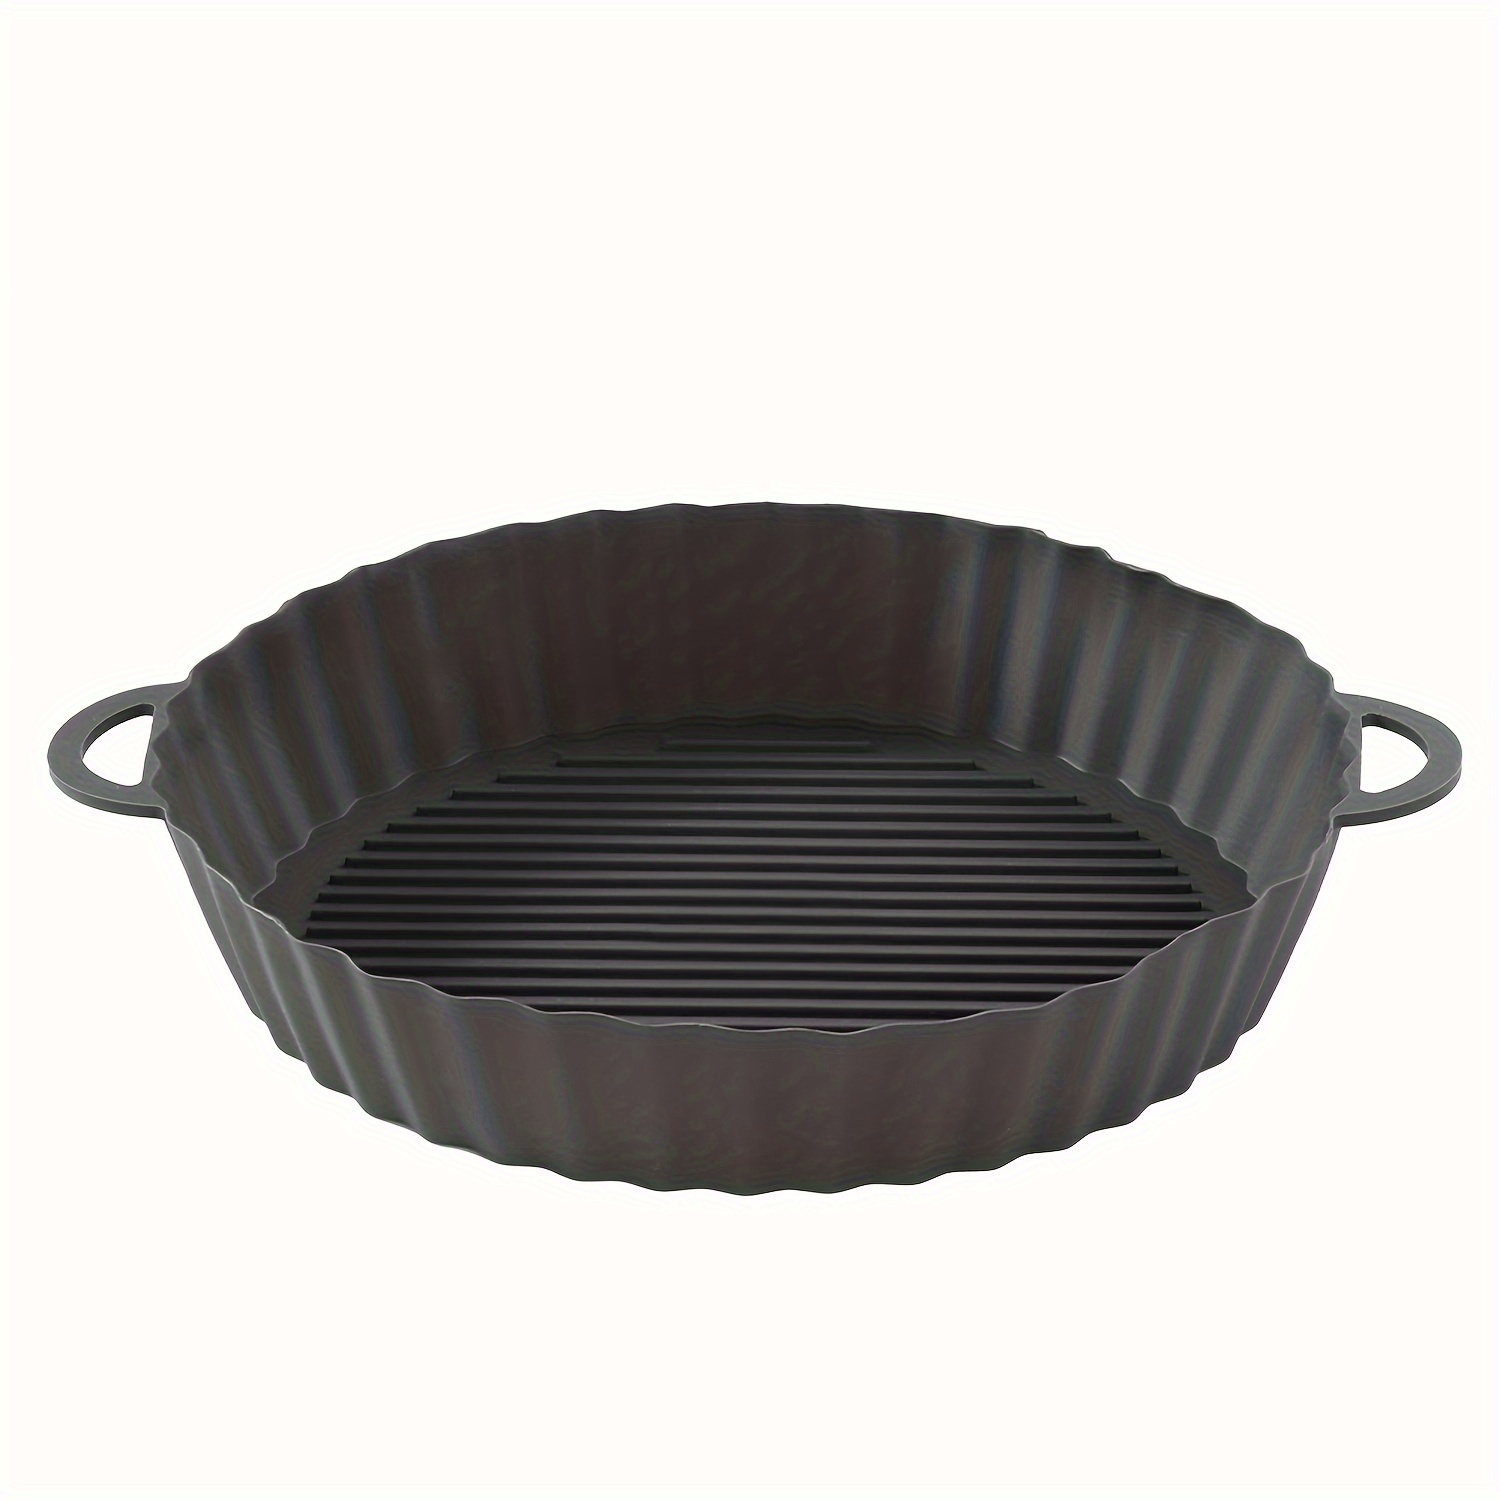 8.2'' Round Grill Plate Tray Air Fryer Grill Pan Replacement Parts